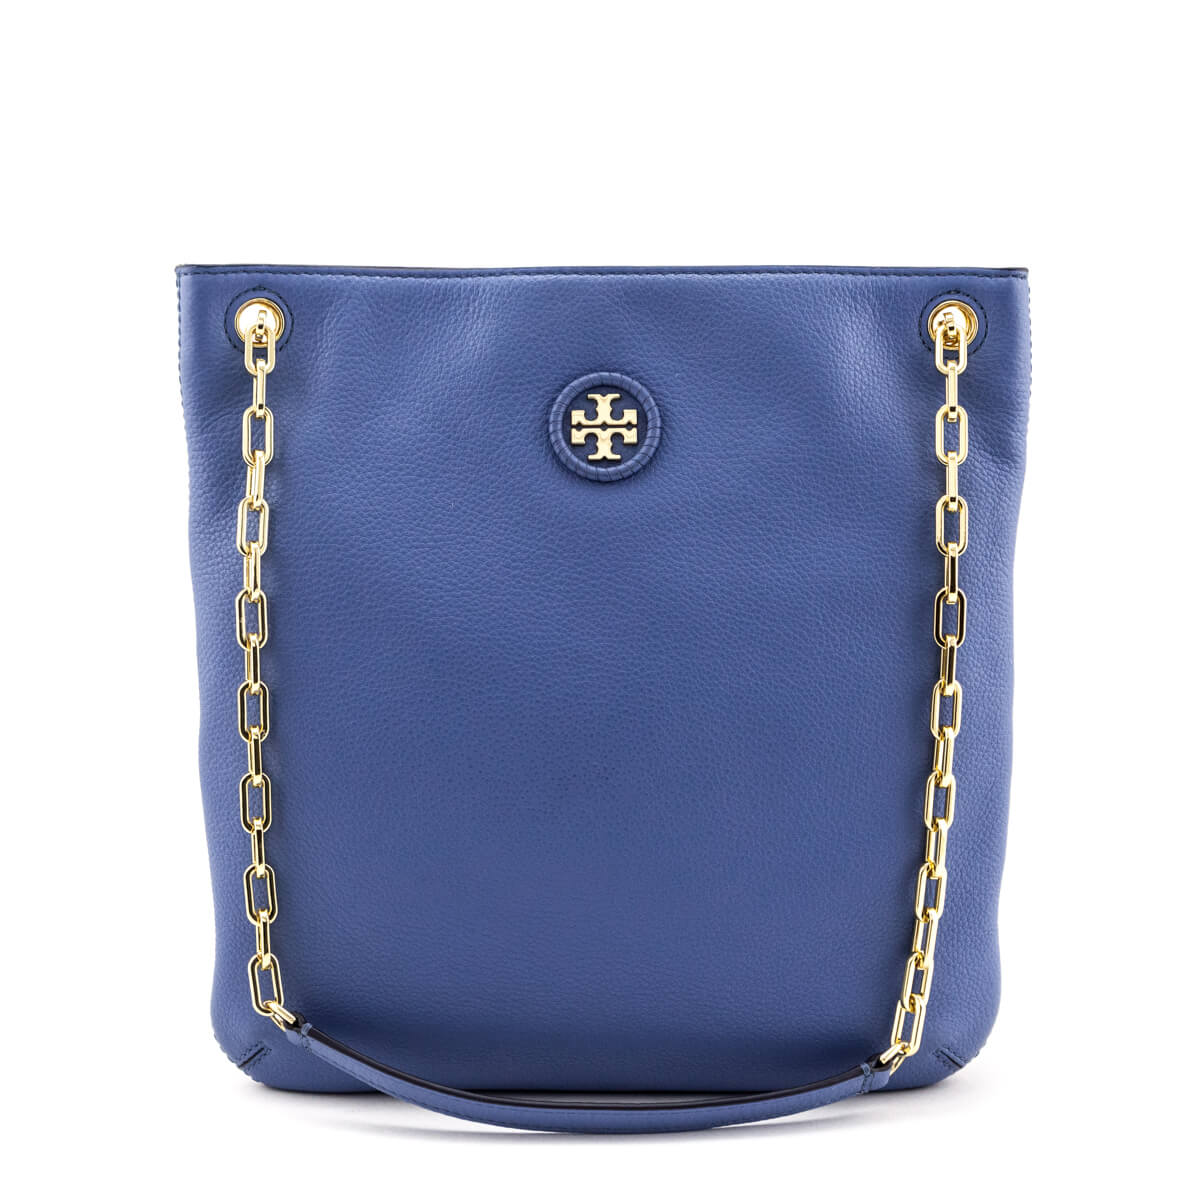 Tory Burch Blue Leather Chain Bucket Bag - Preloved Tory Burch Bags CA